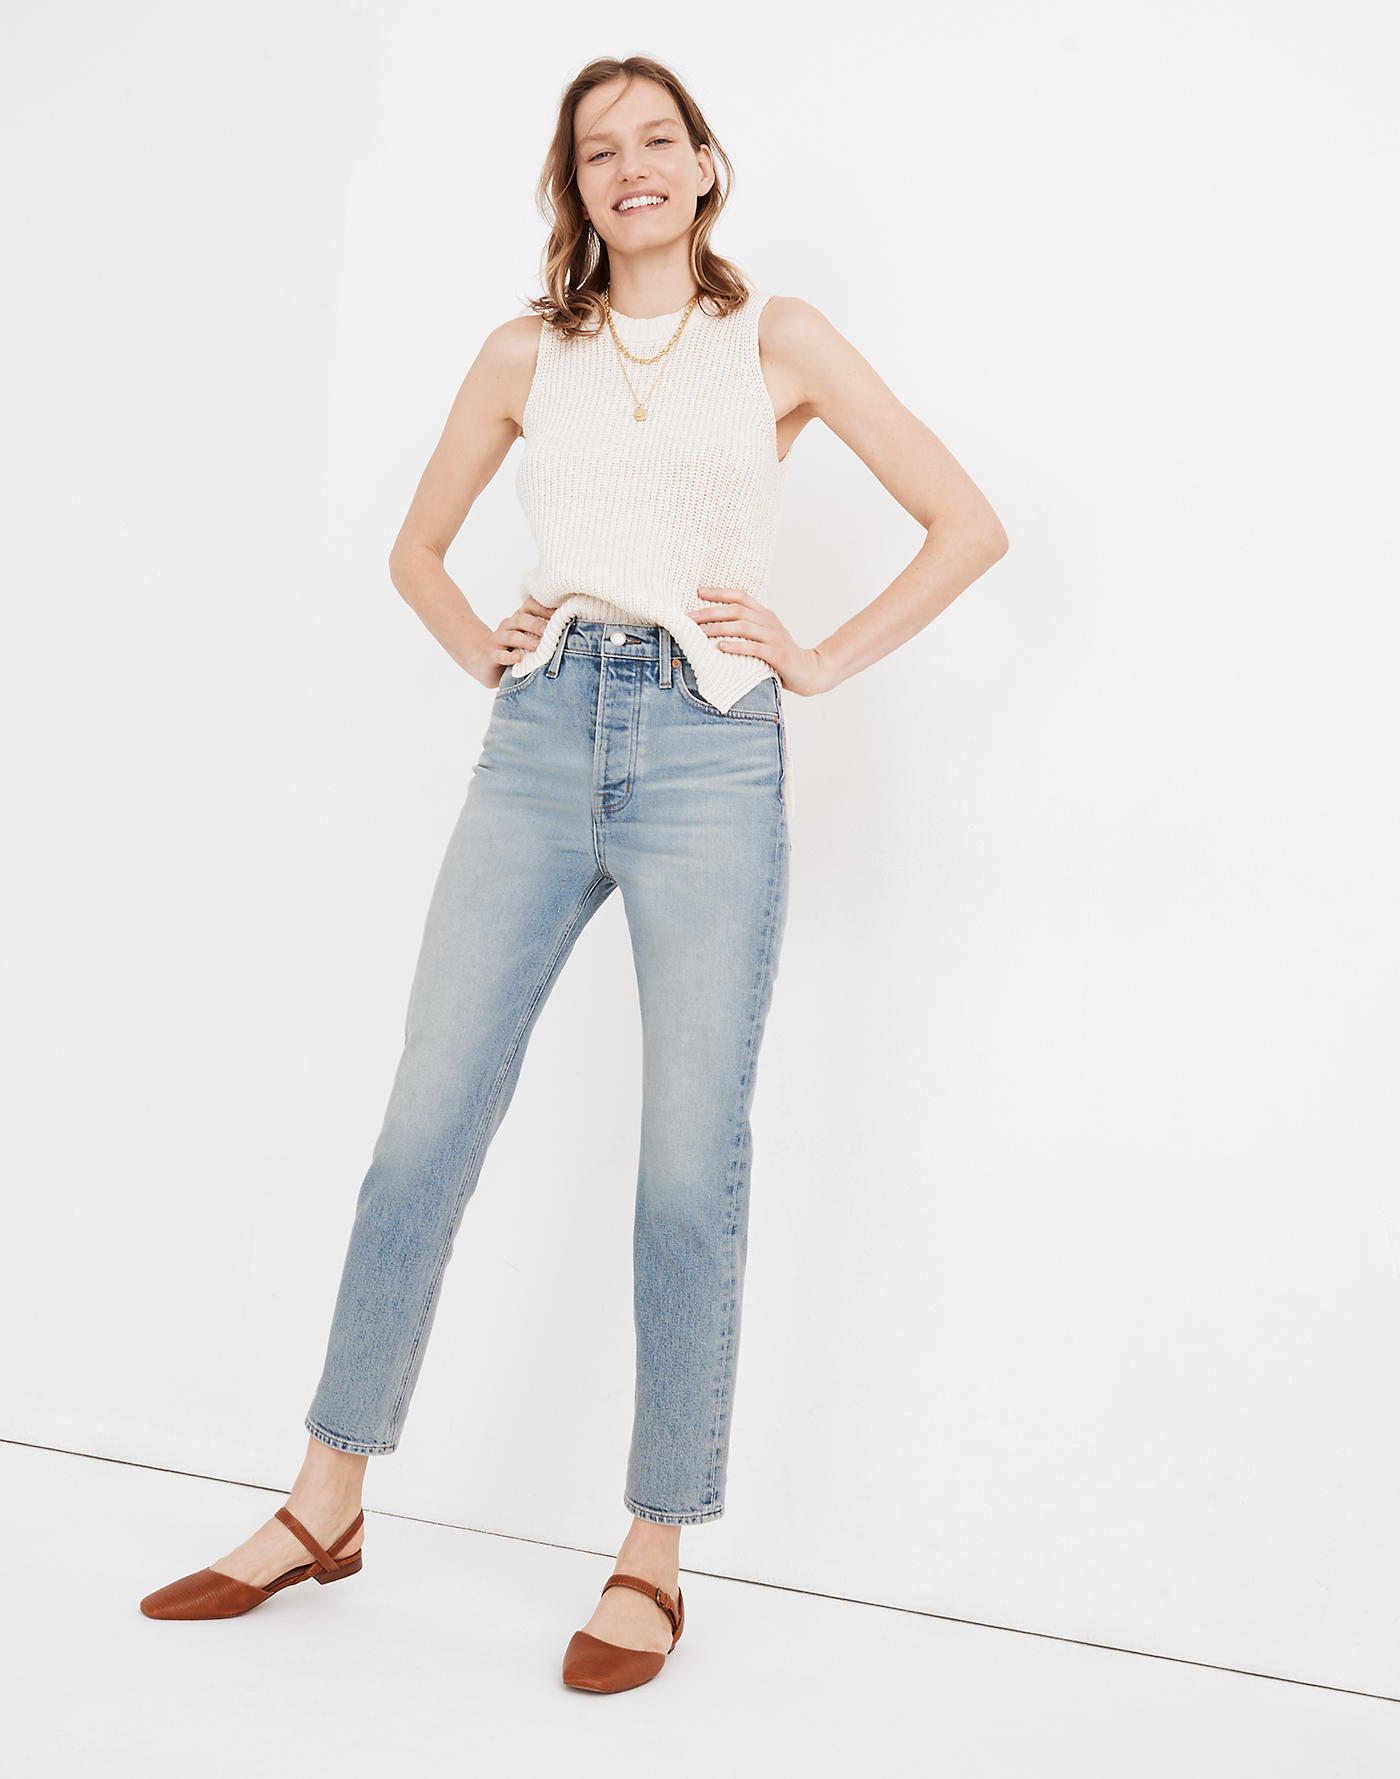 Madewell Rivet & Thread Perfect Vintage Jeans in Ryerson Wash